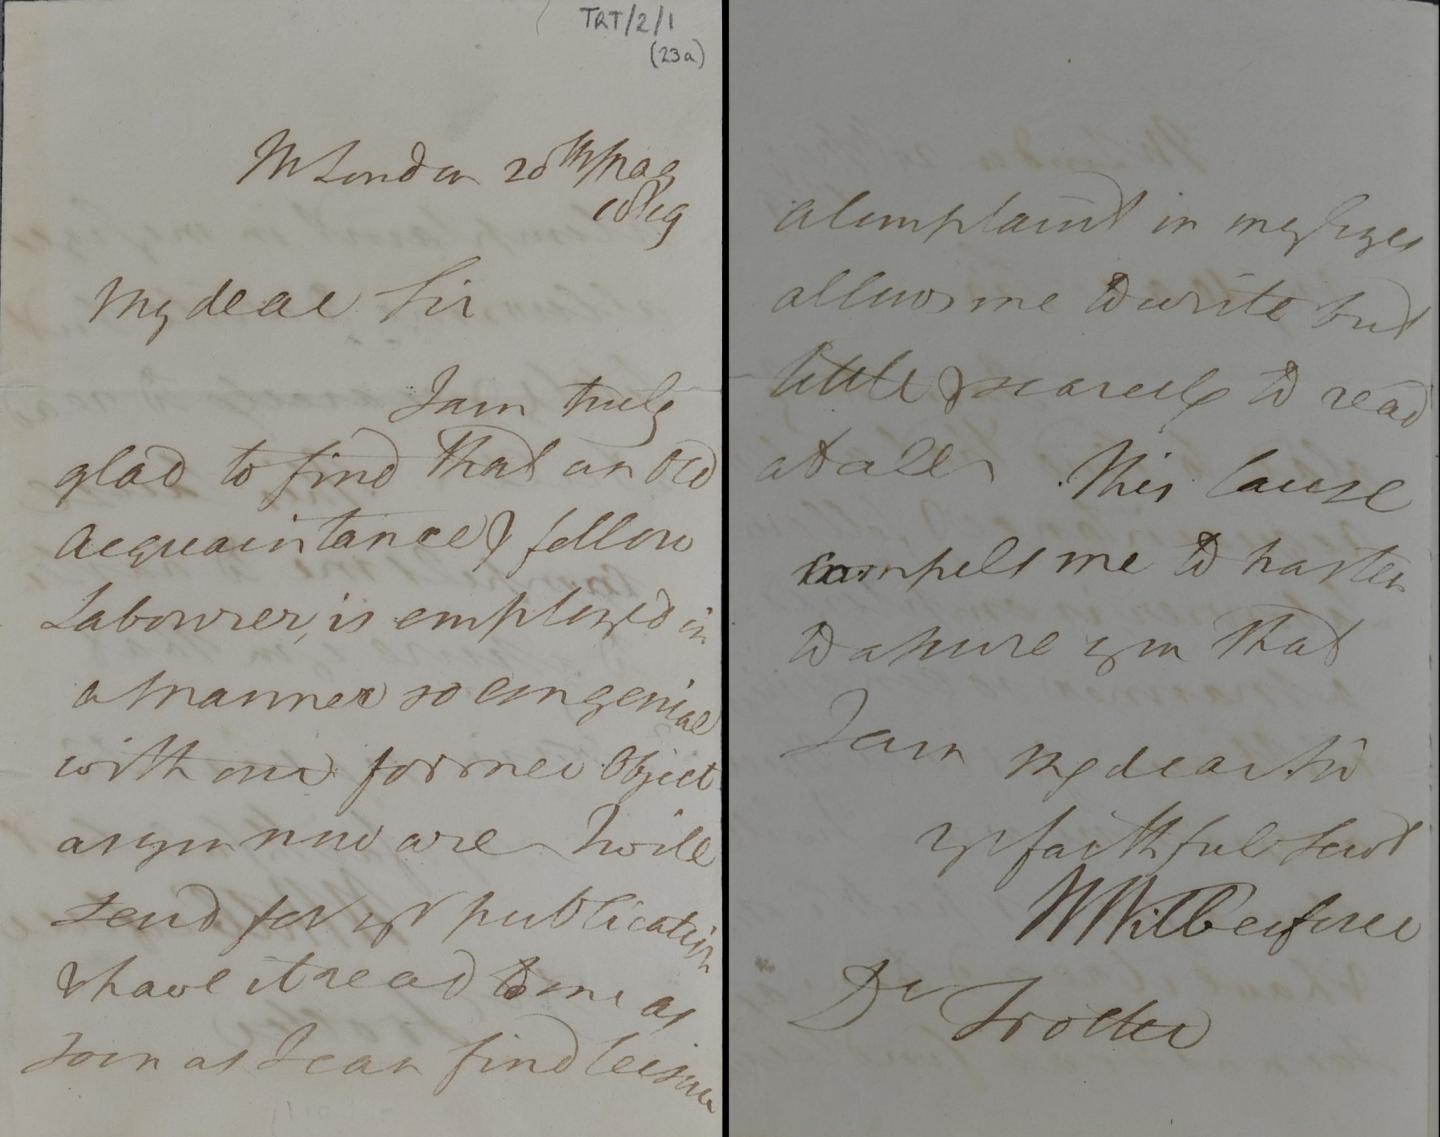 a letter from William Wilberforce